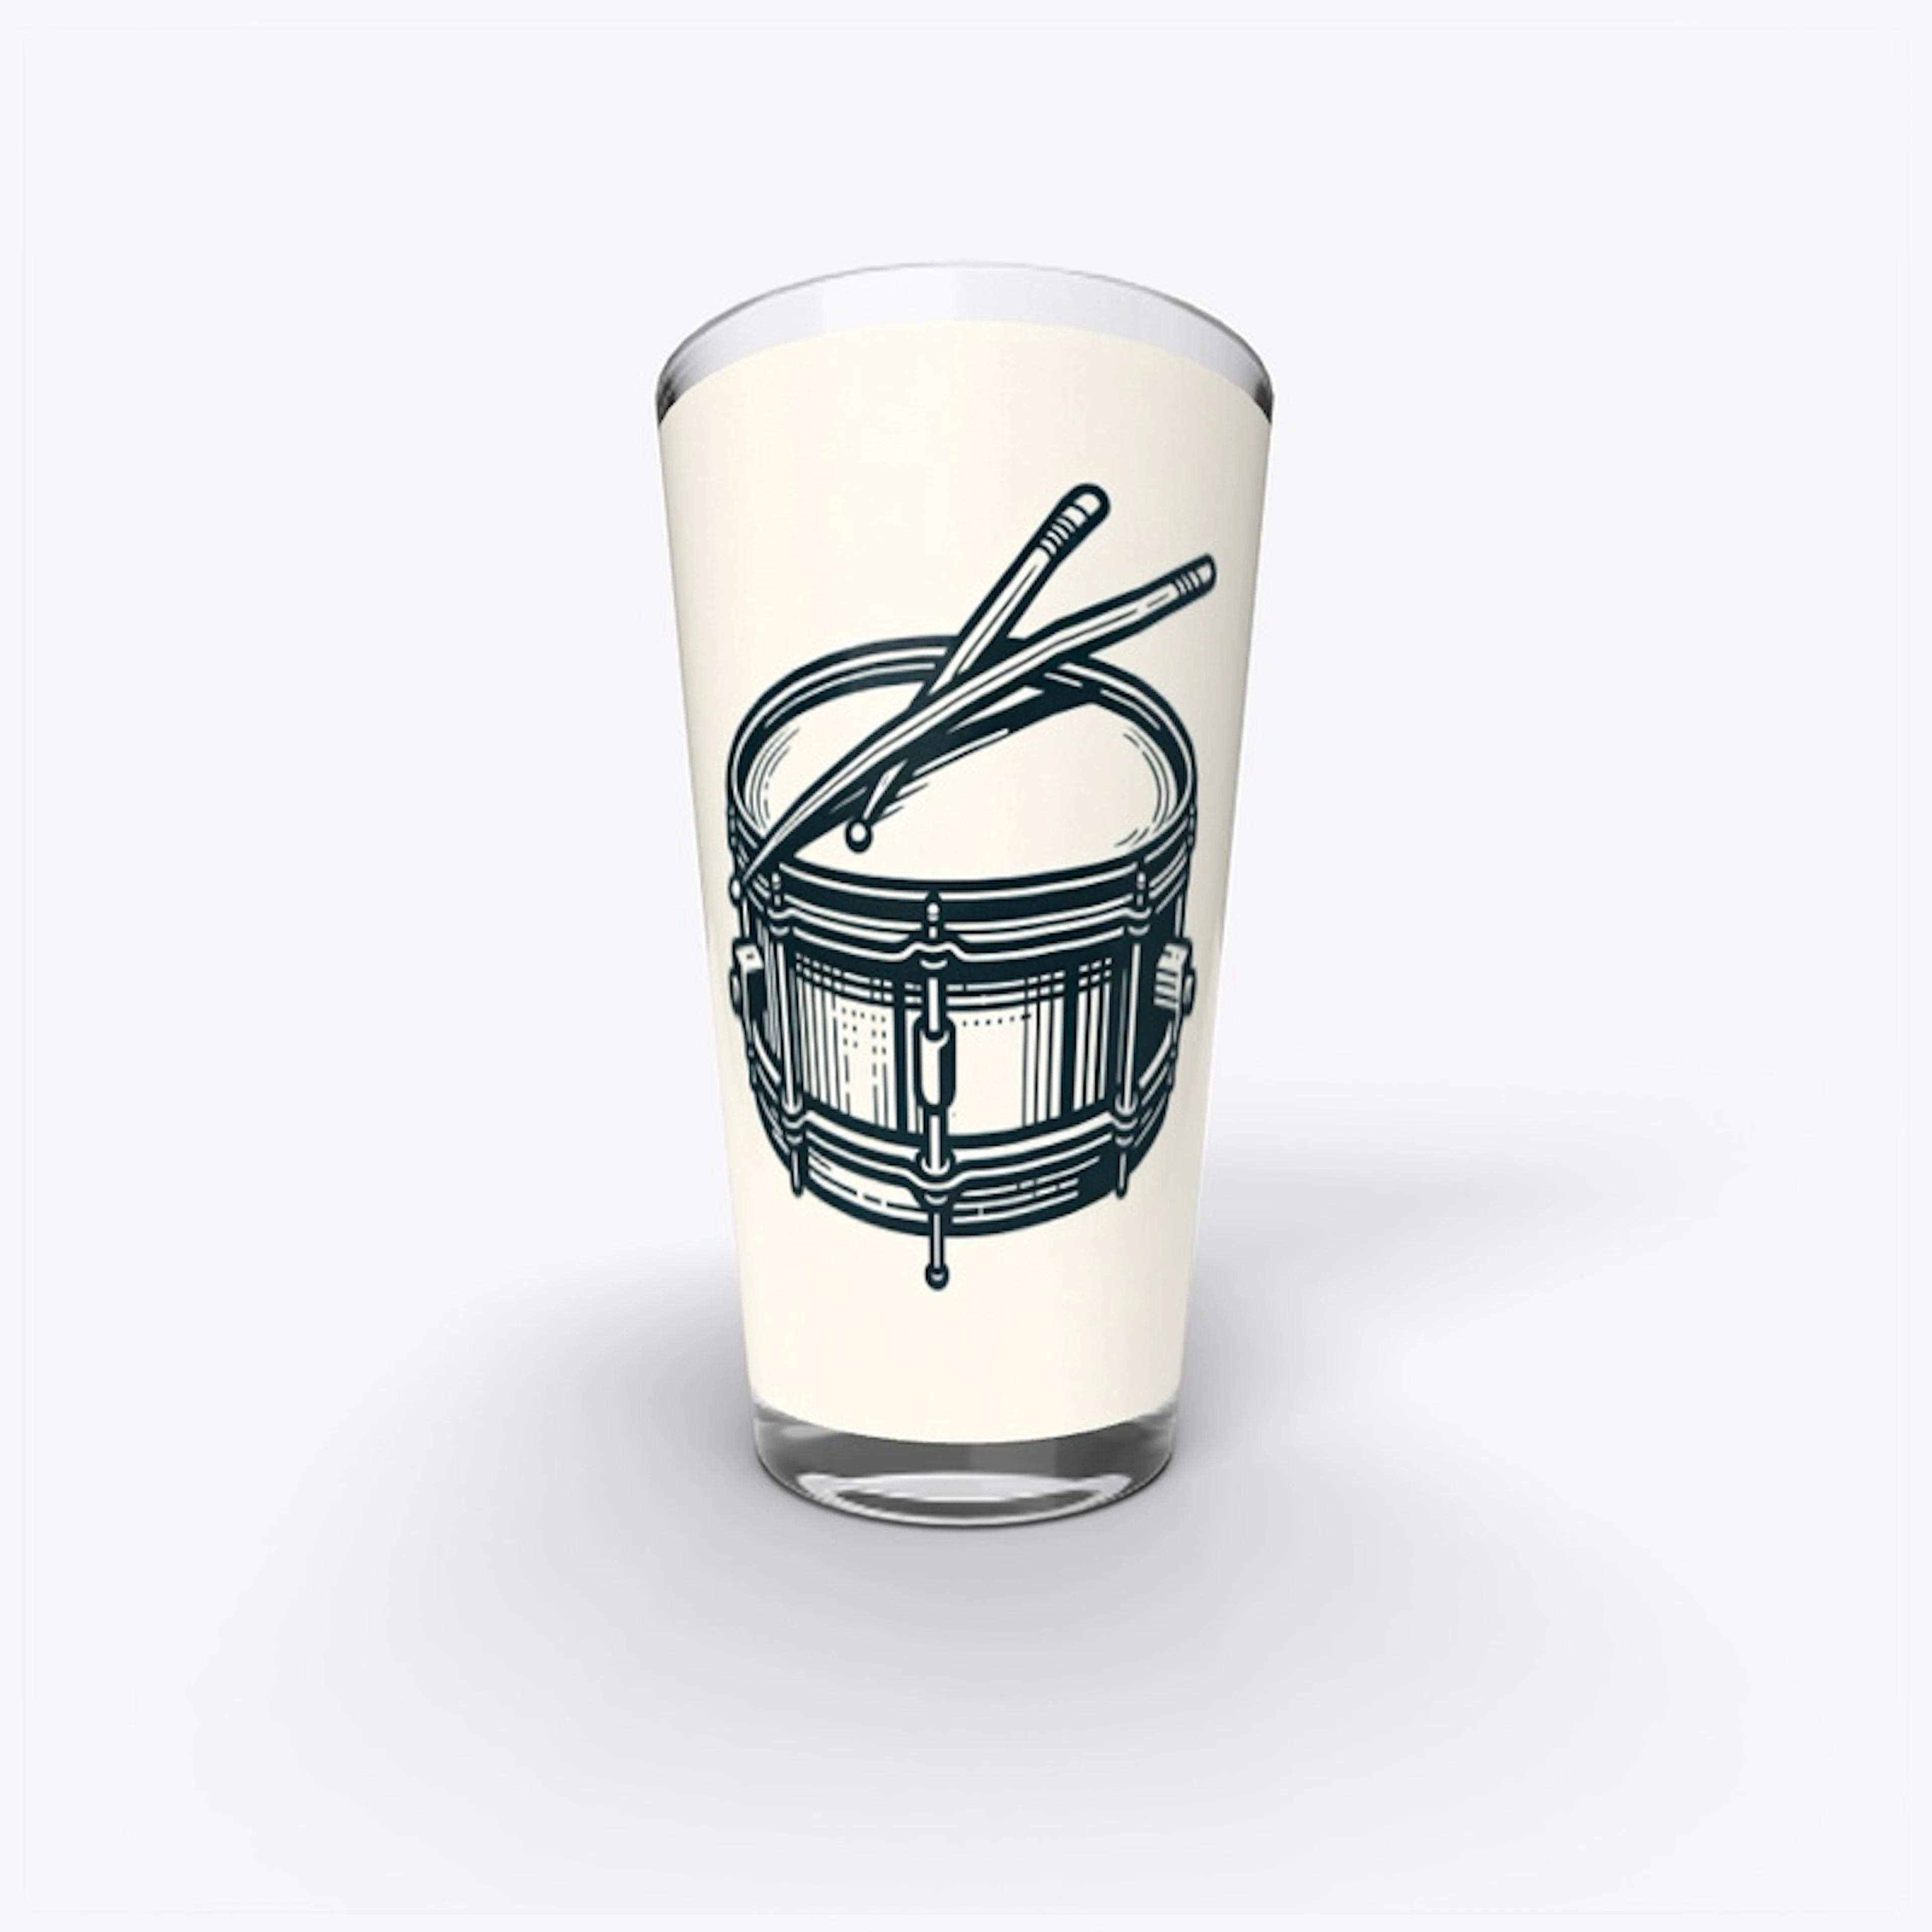 Snare drum pint glass